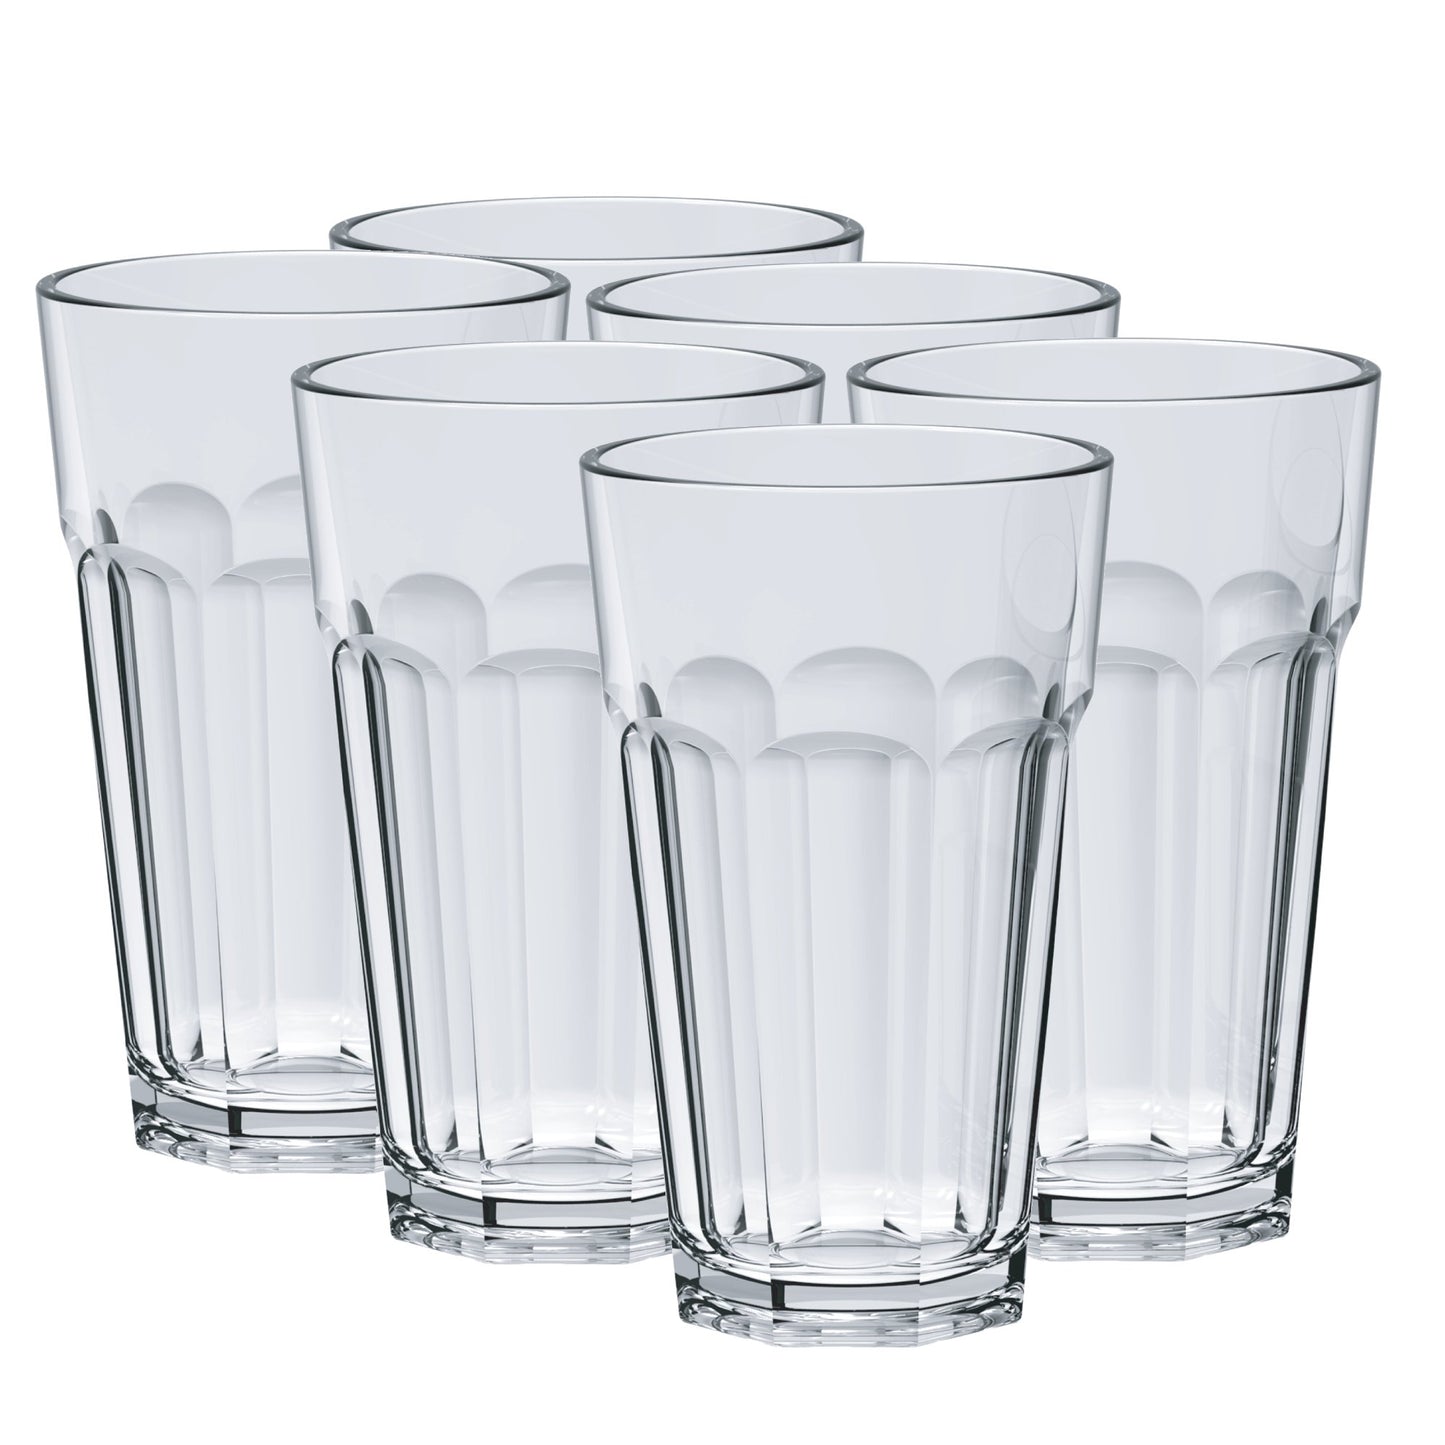 Acrylic Drinking Glasses Drinking Cups Tumbler Glassware (Set of 6)